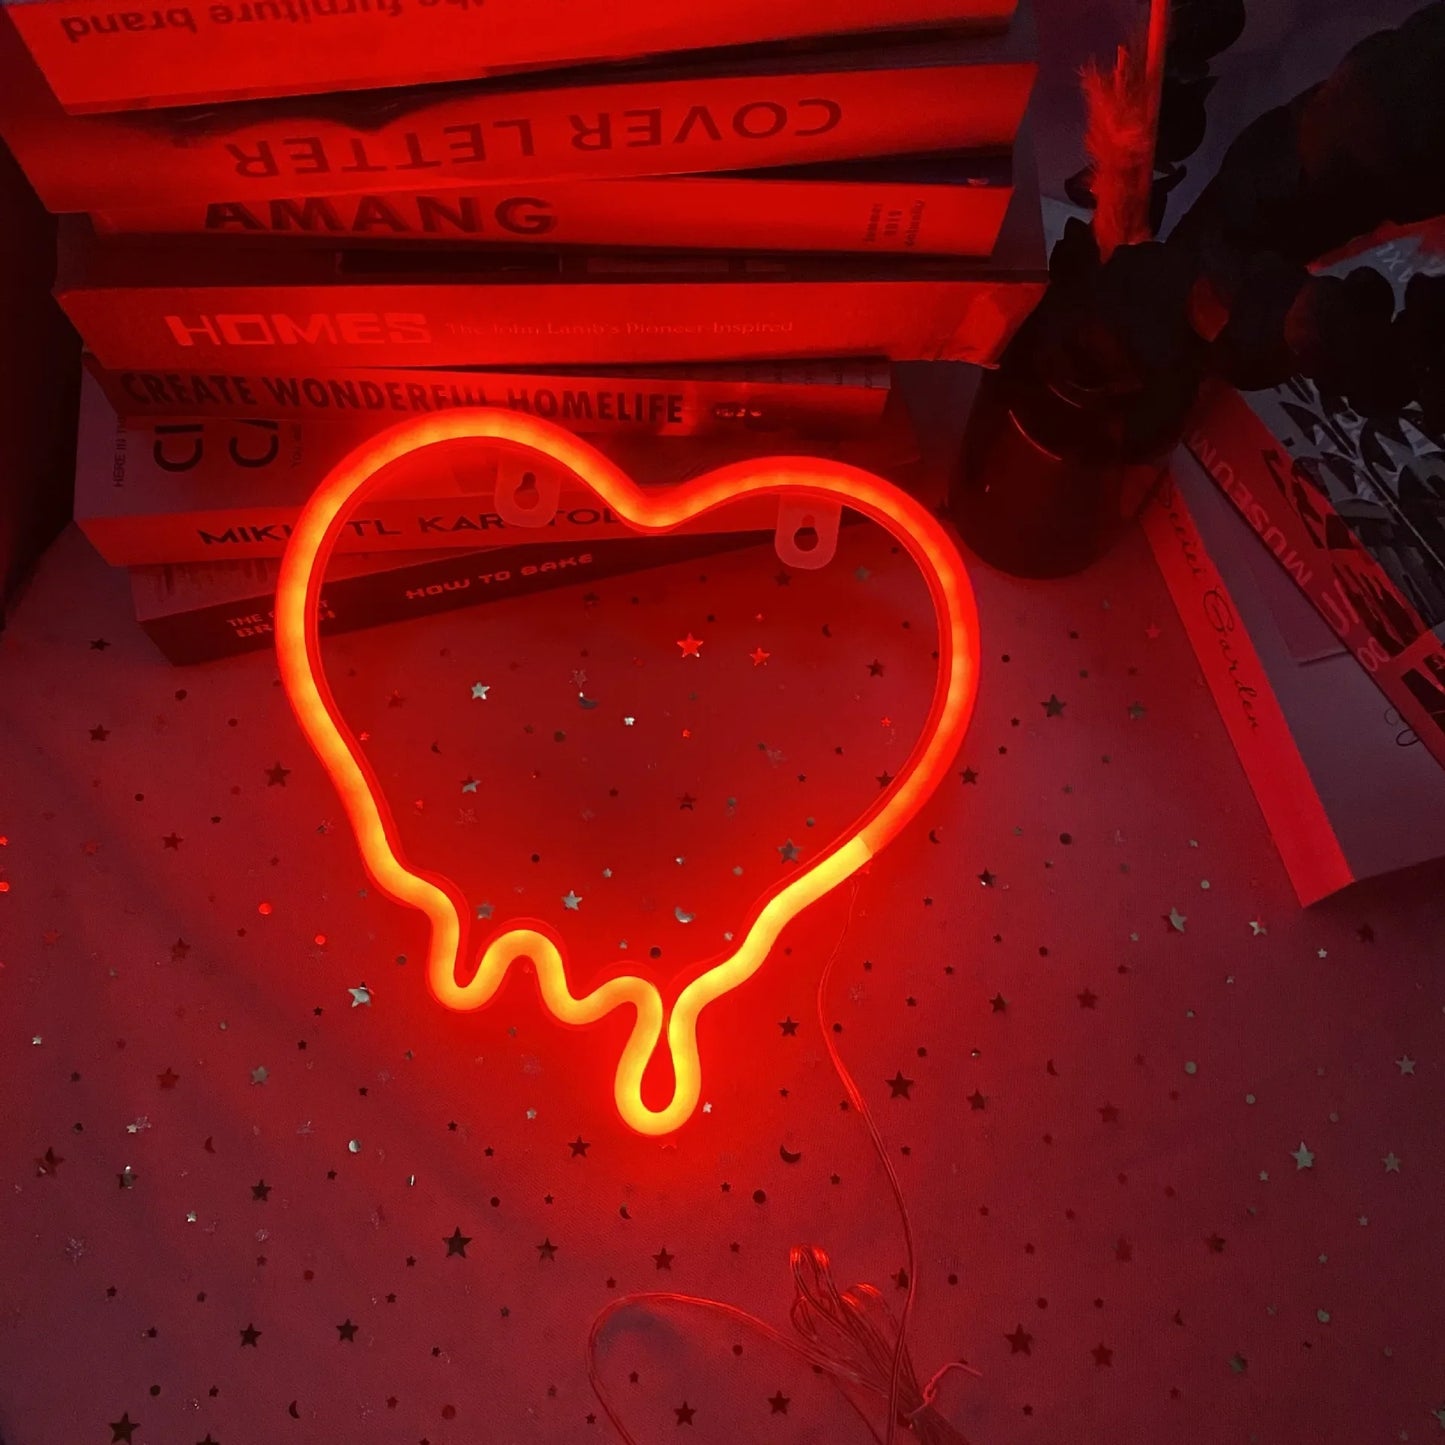 Mouth, Lip, Heart, Wings Neon Sign